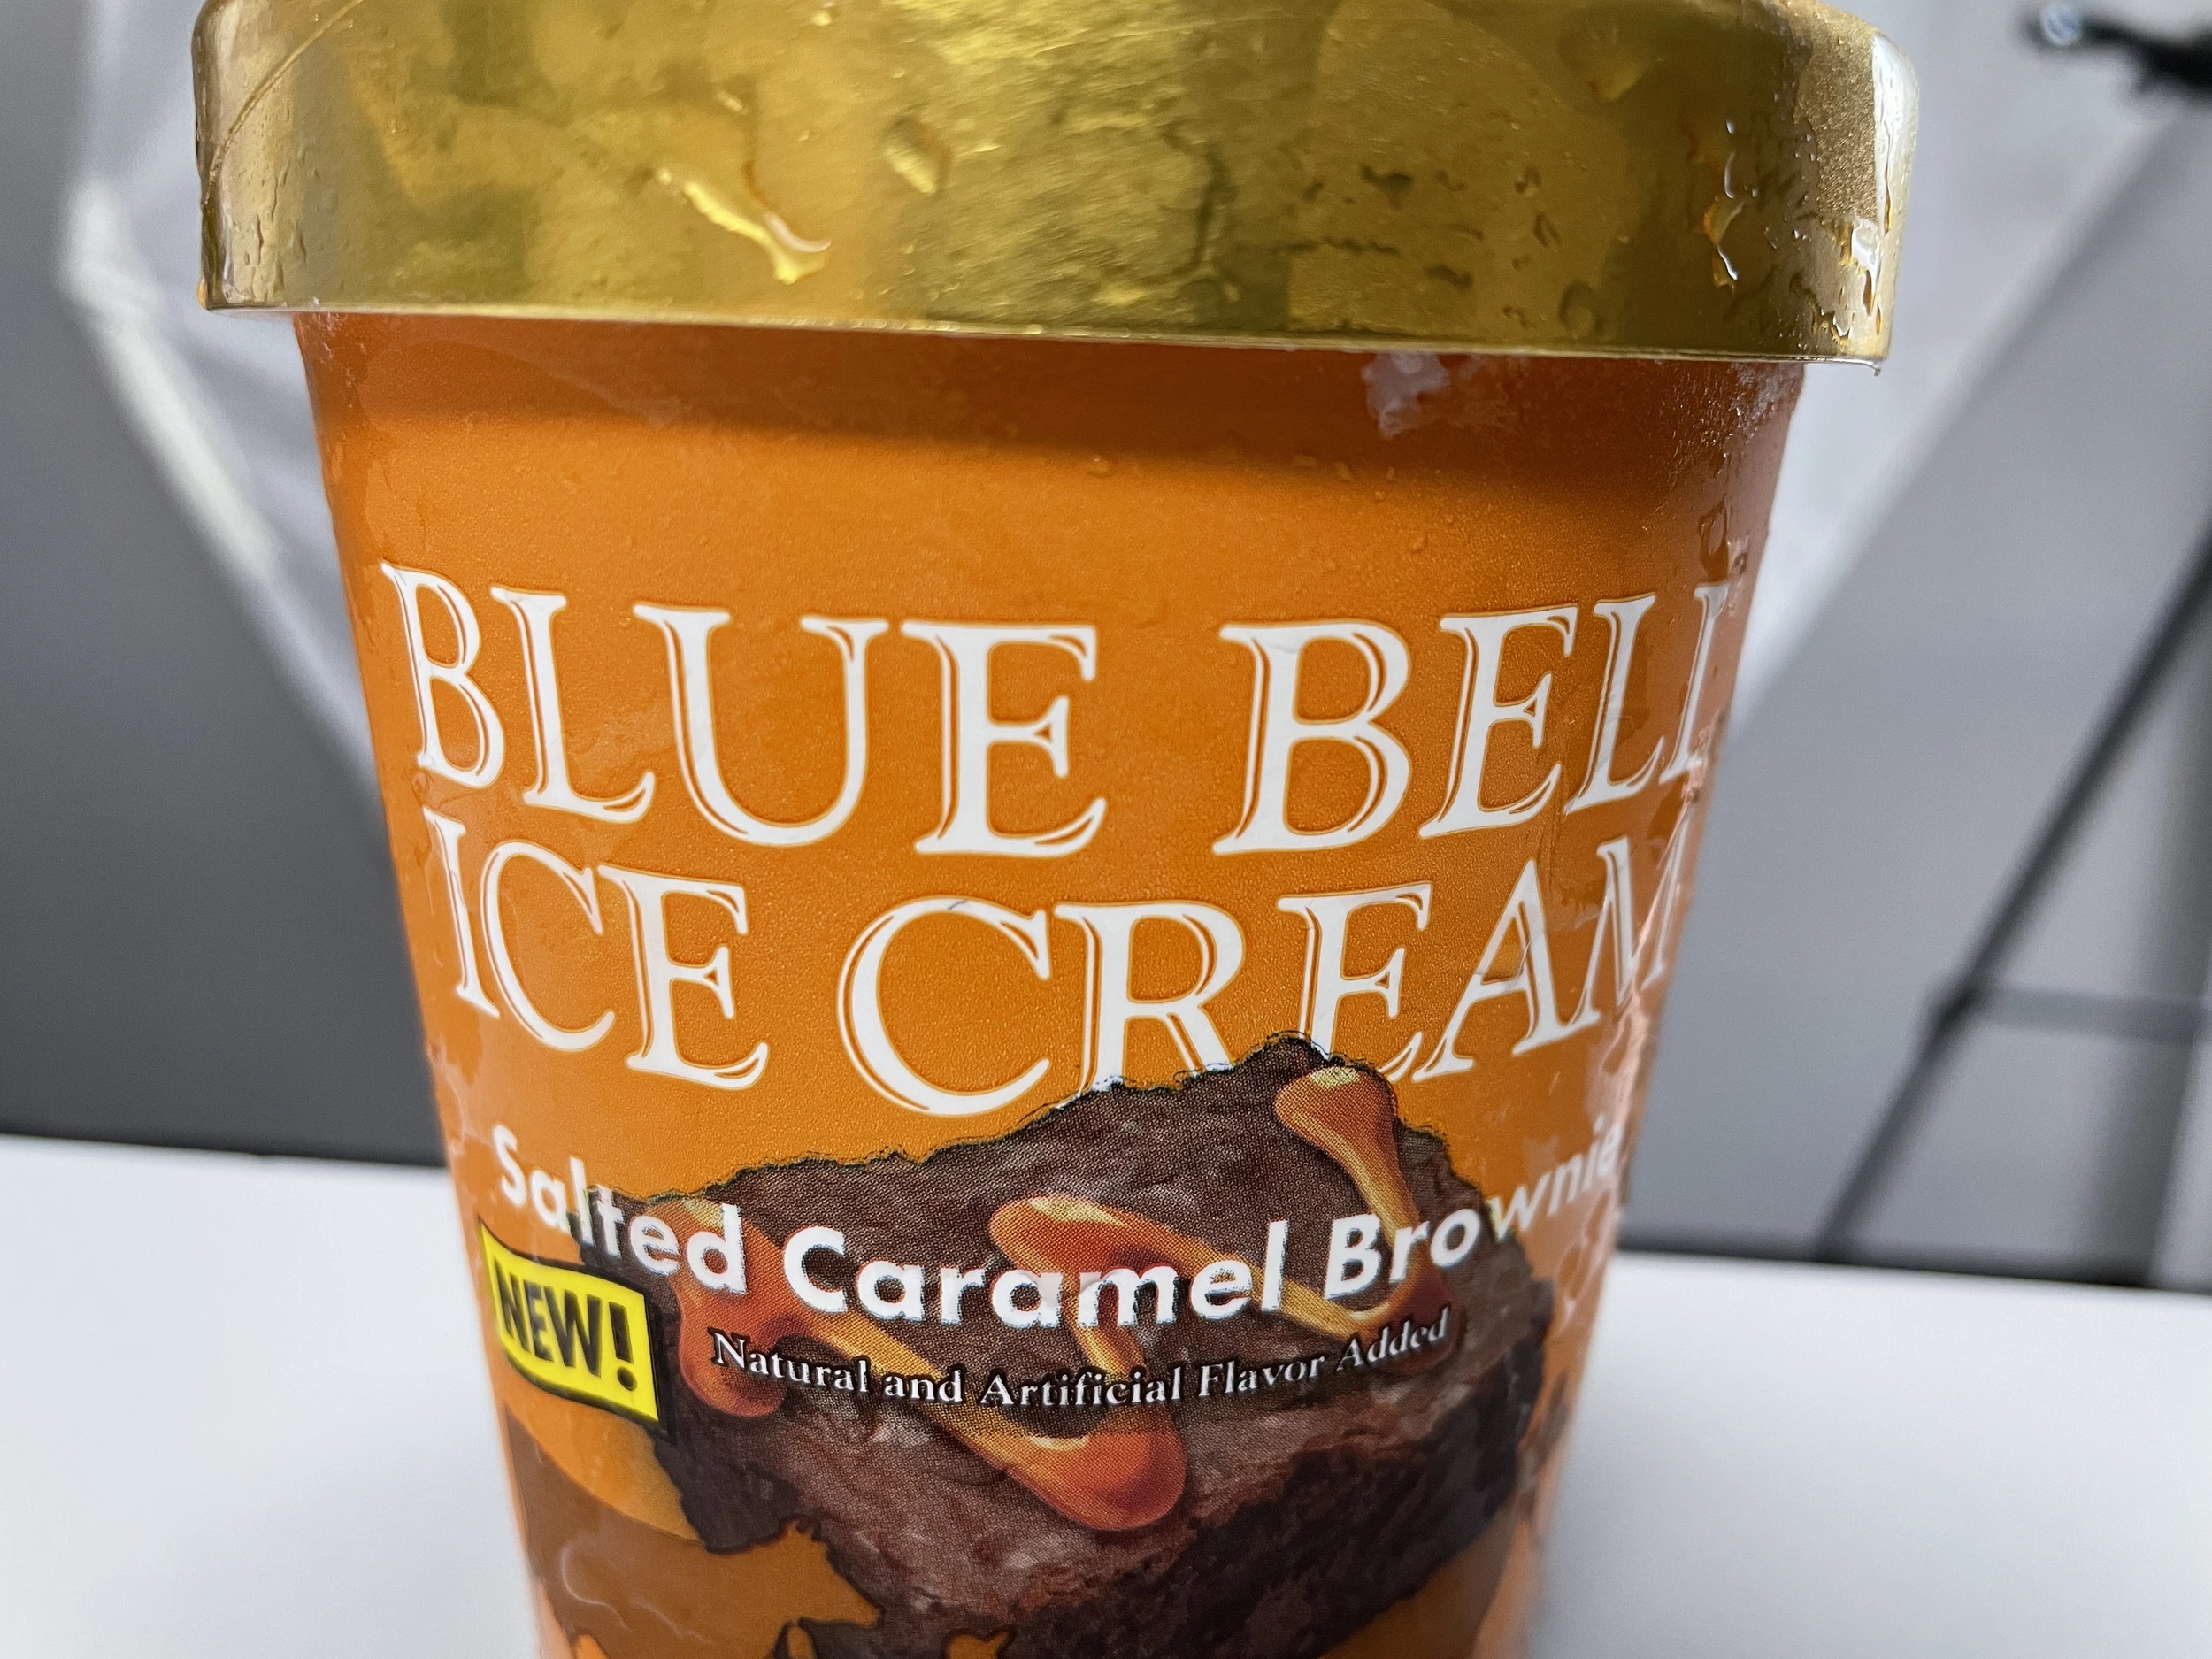 Texans Rank Every Blue Bell Flavor From Worst to Best